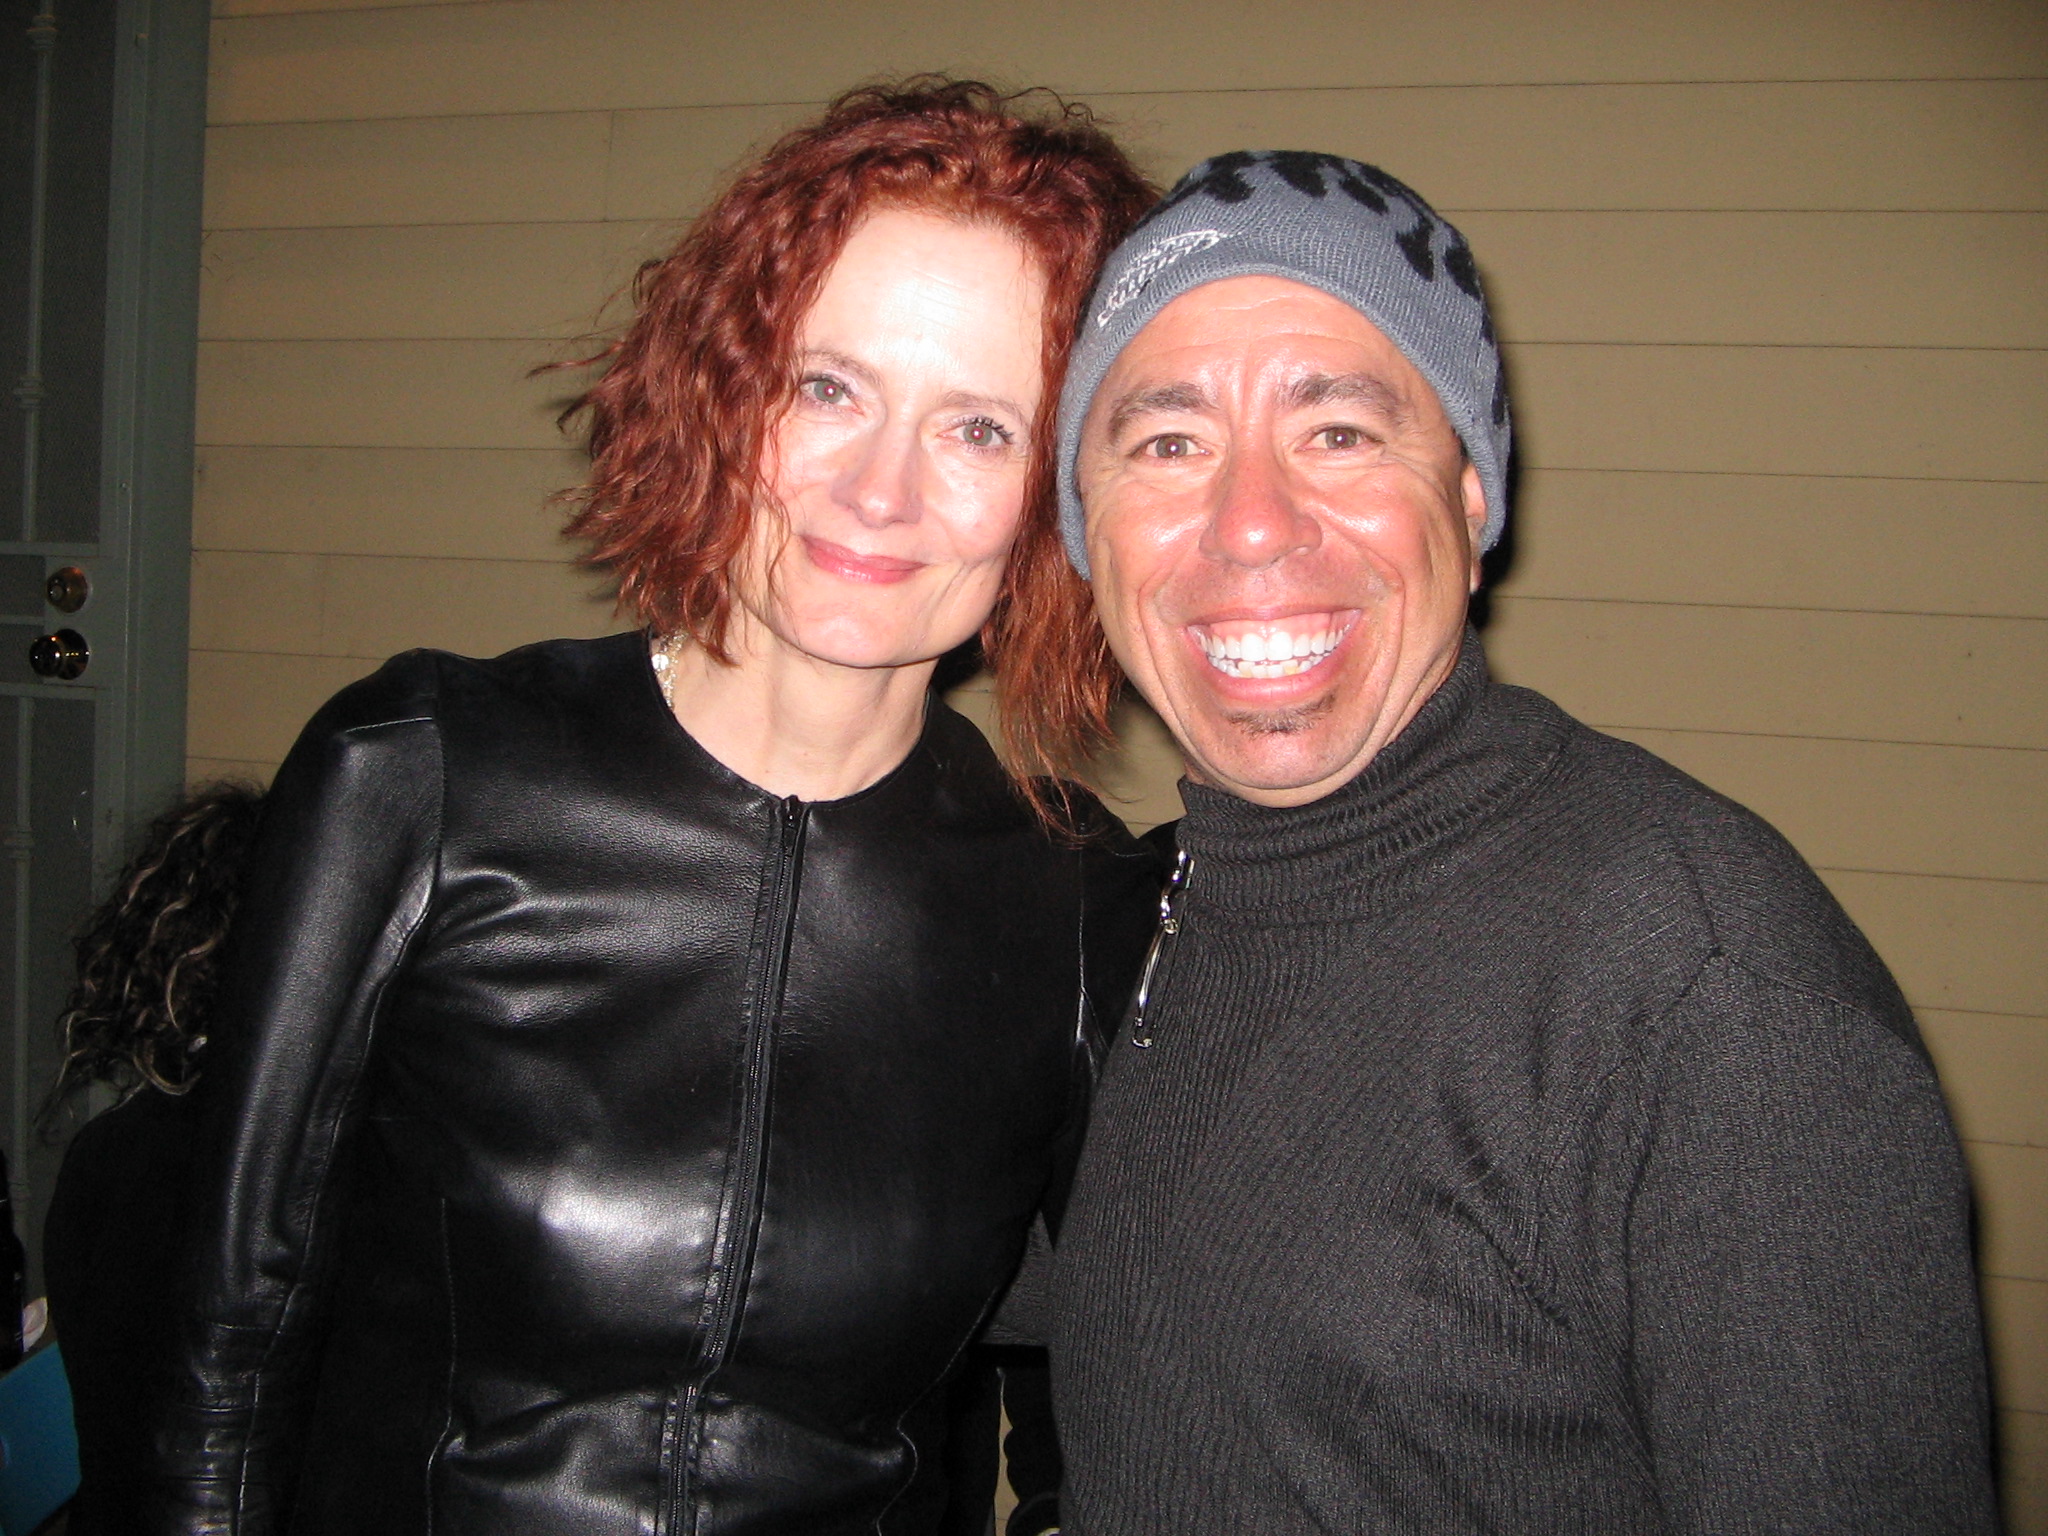 Anthony with fellow actor & dear friend Diane Salinger